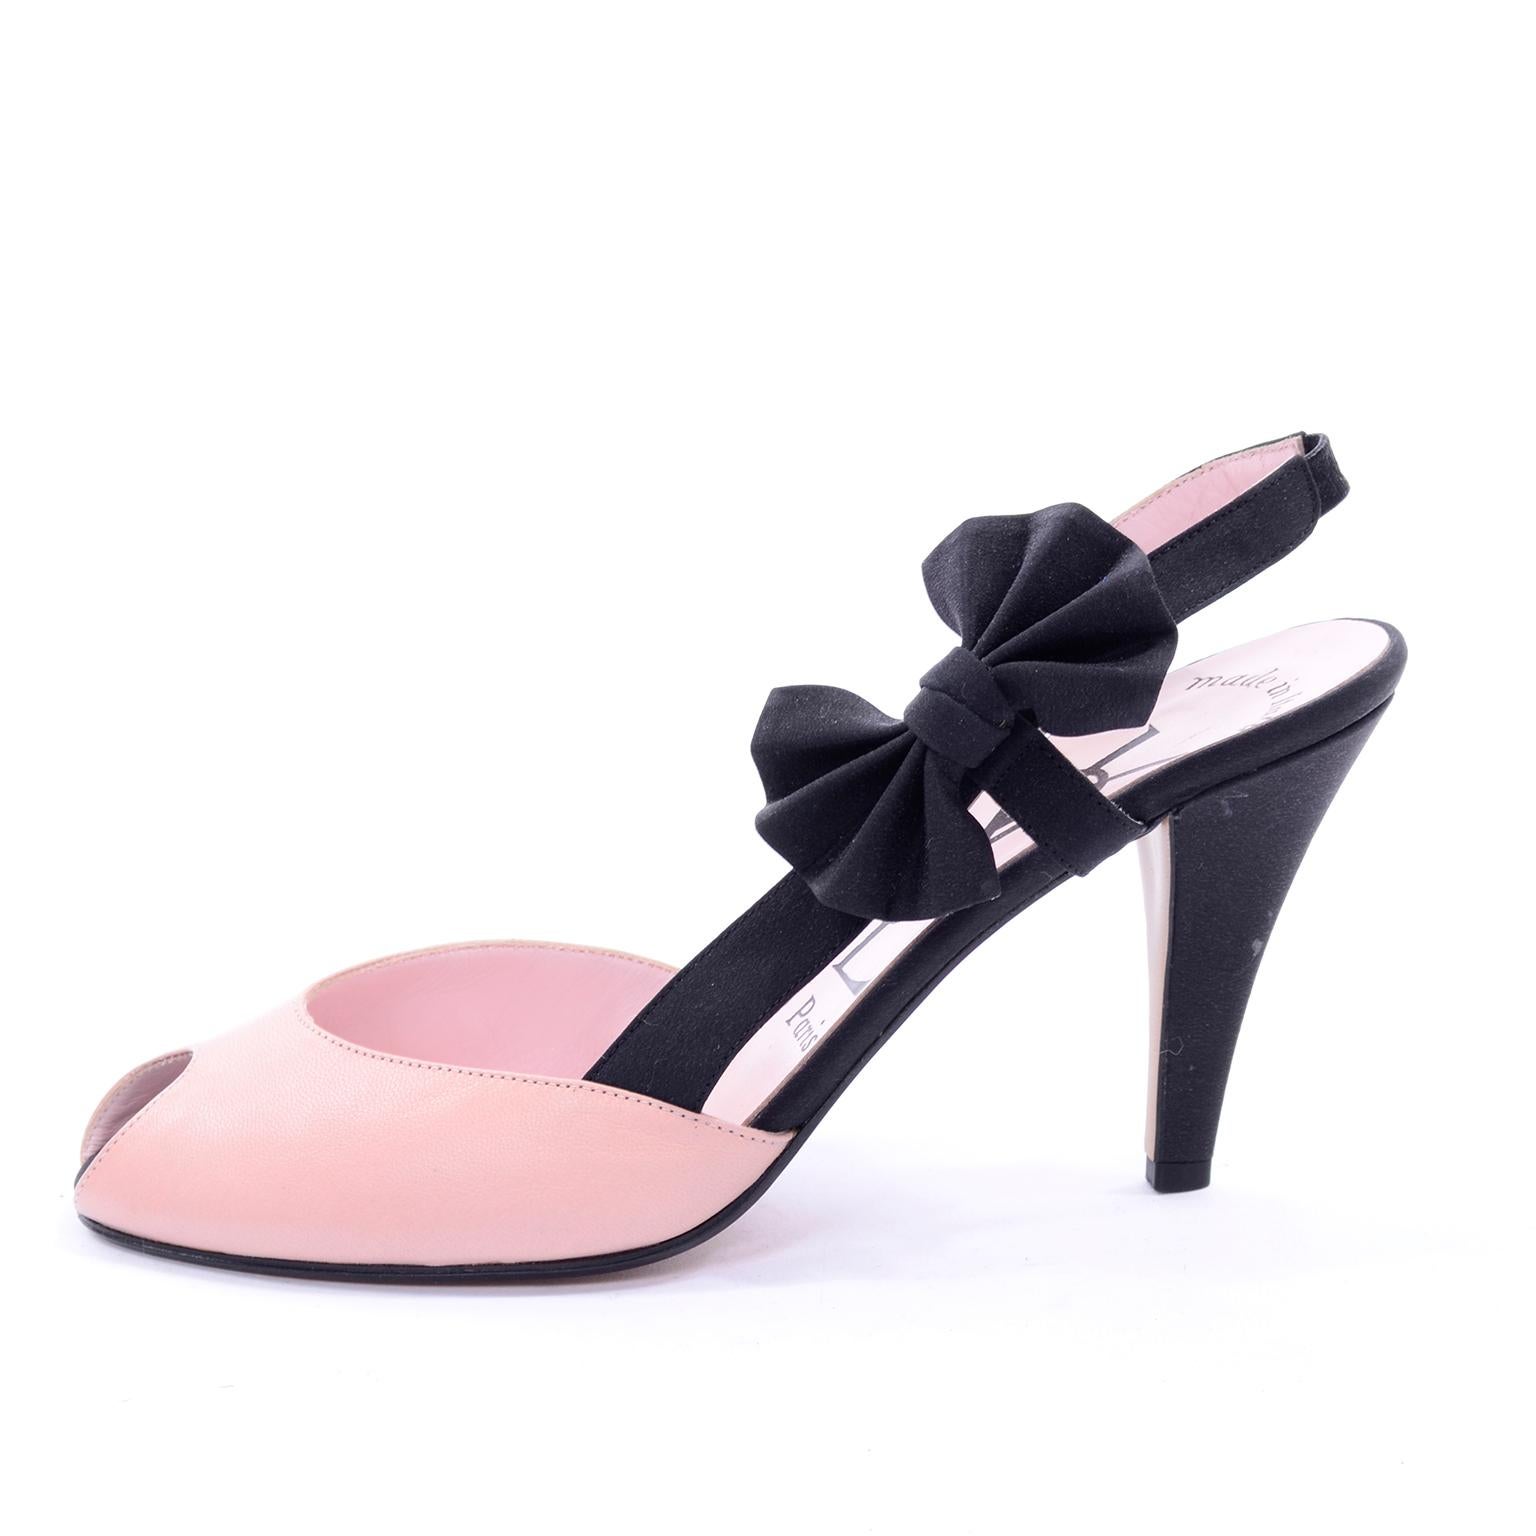 Pink Slingback Peep Toe YSL Shoes With Black Bows & 3.75 Inch Heels Size 7.5N 1